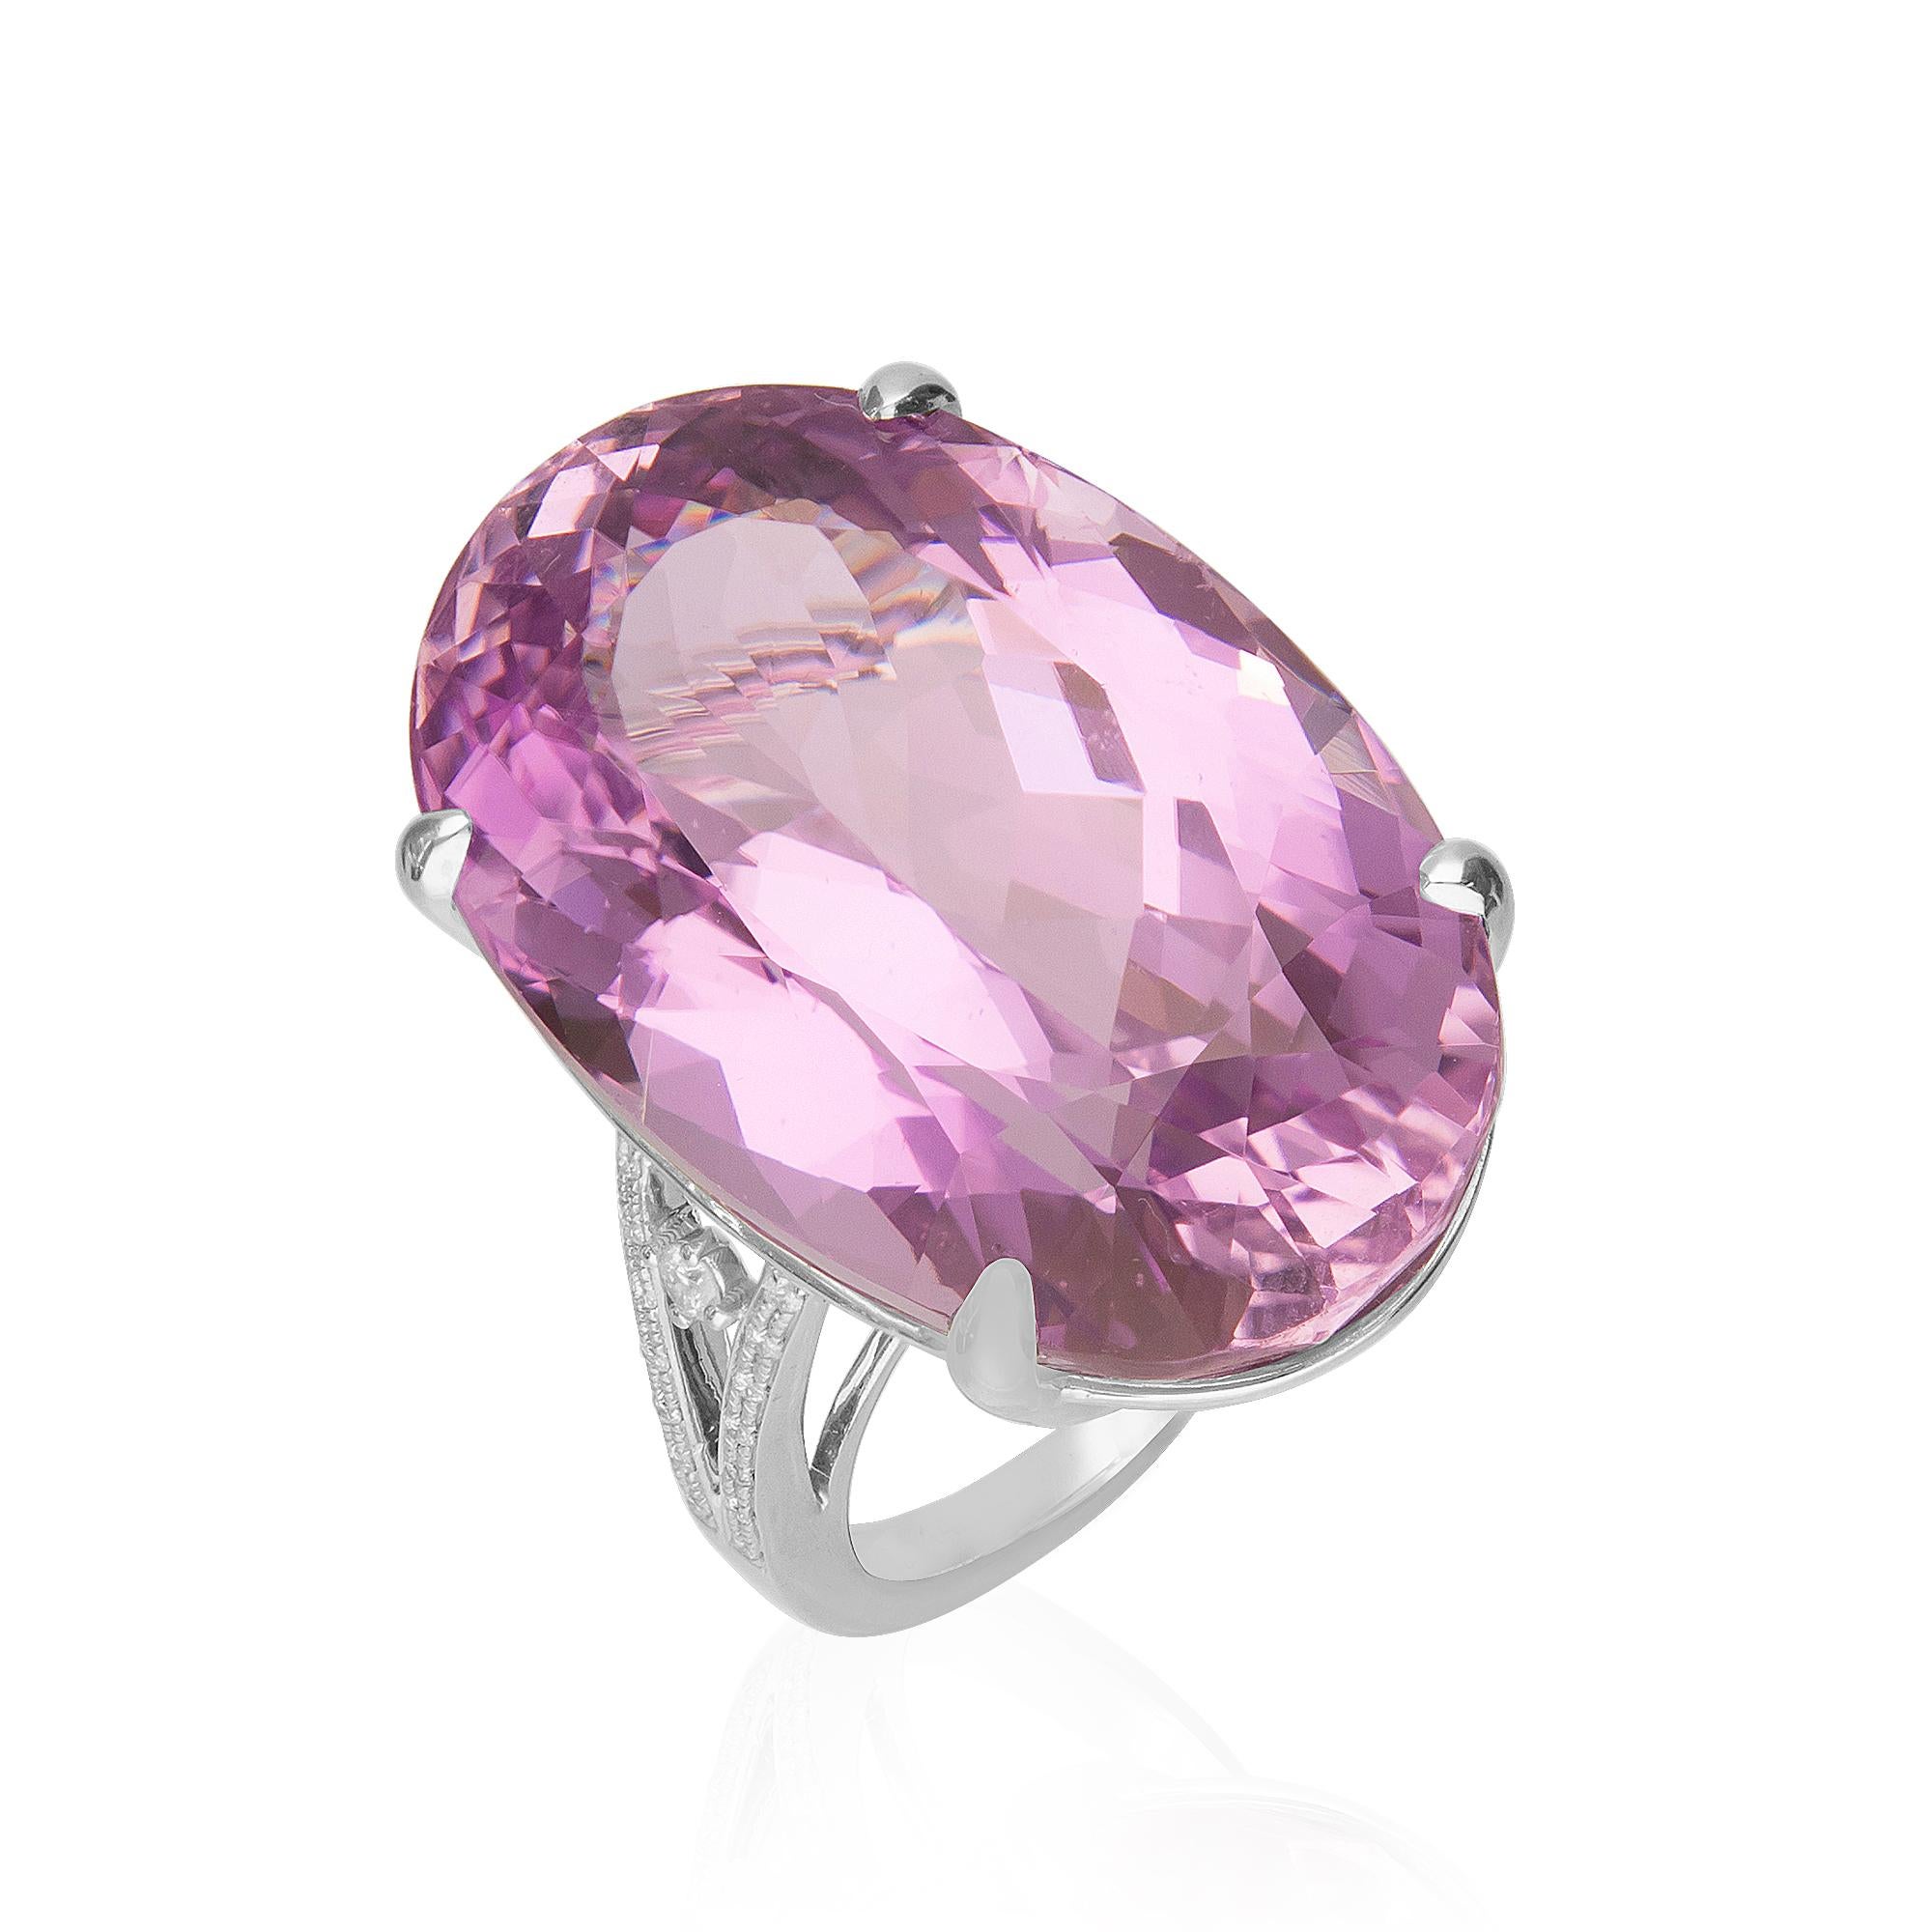 Make a statement with our Gin and Grace Kunzite and diamond ring crafted of 14k white gold. This jewelry is the ideal way to showcase your bold style. 
This ring features an oval cut Kunzite weighing a massive 49.52 carats as well as 0.16 carat of